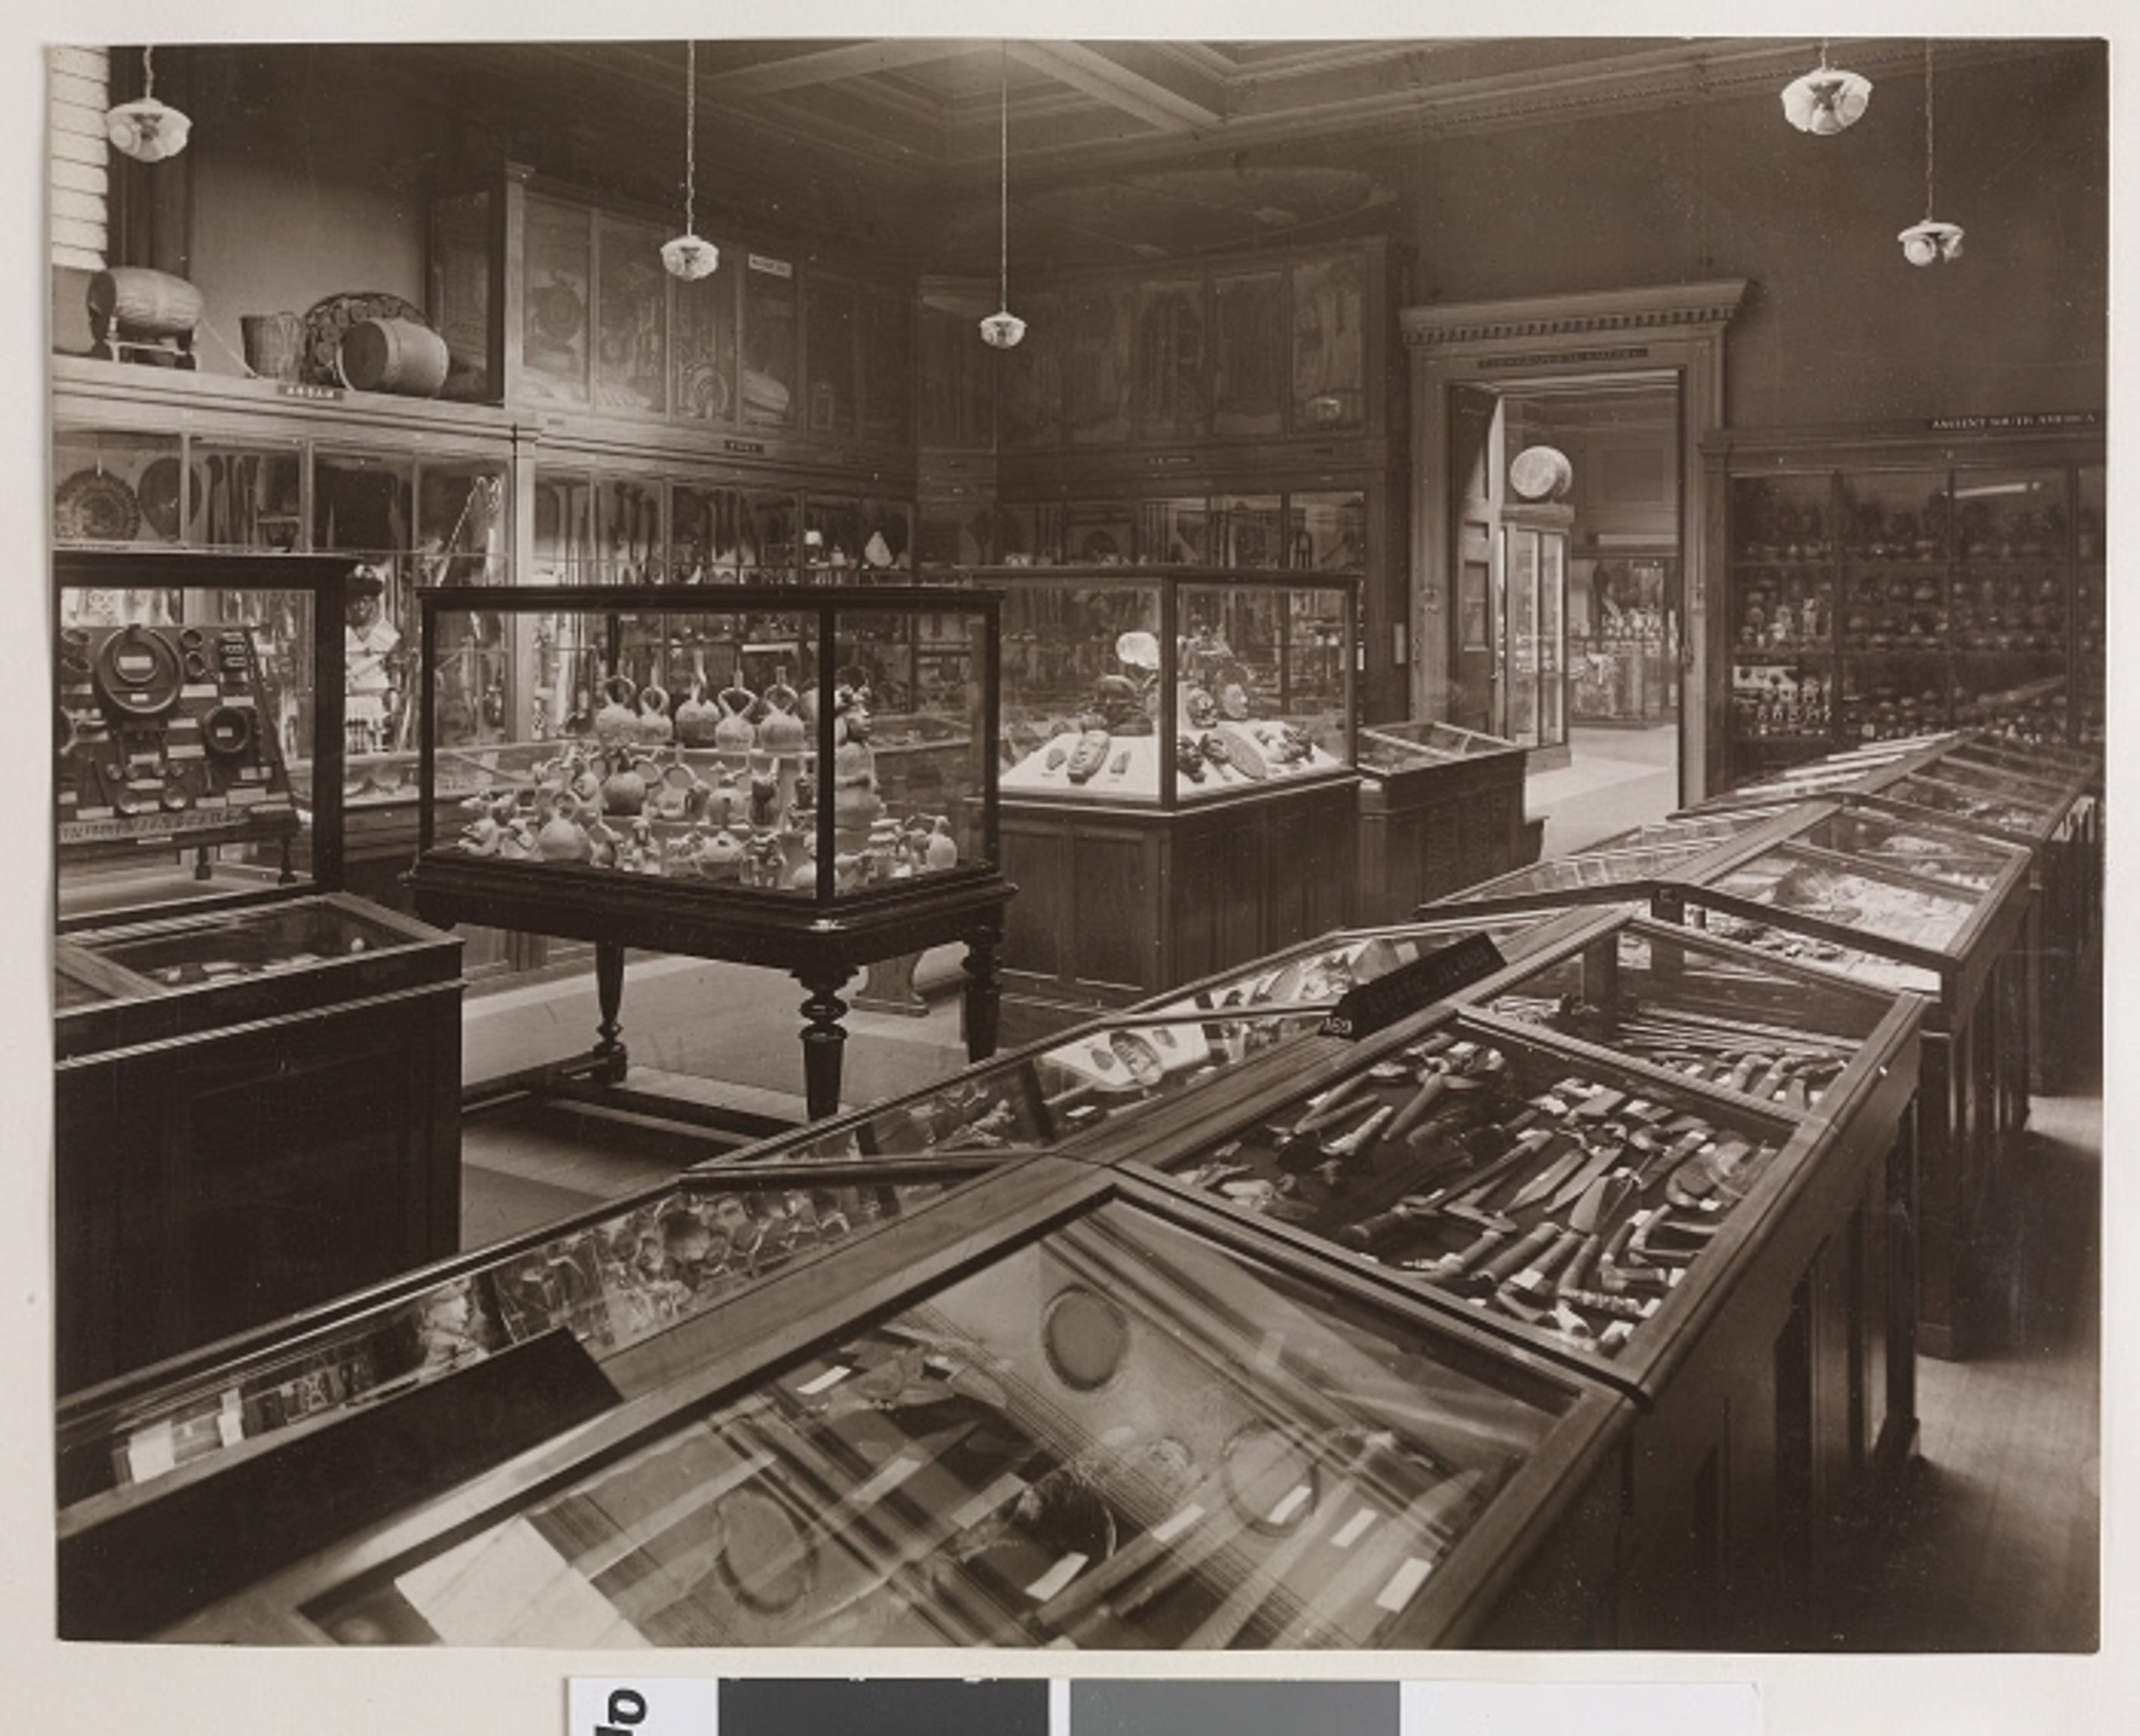 A black-and-white photograph of the British Museum from 1908, featuring objects exhibited inside glass vitrines.